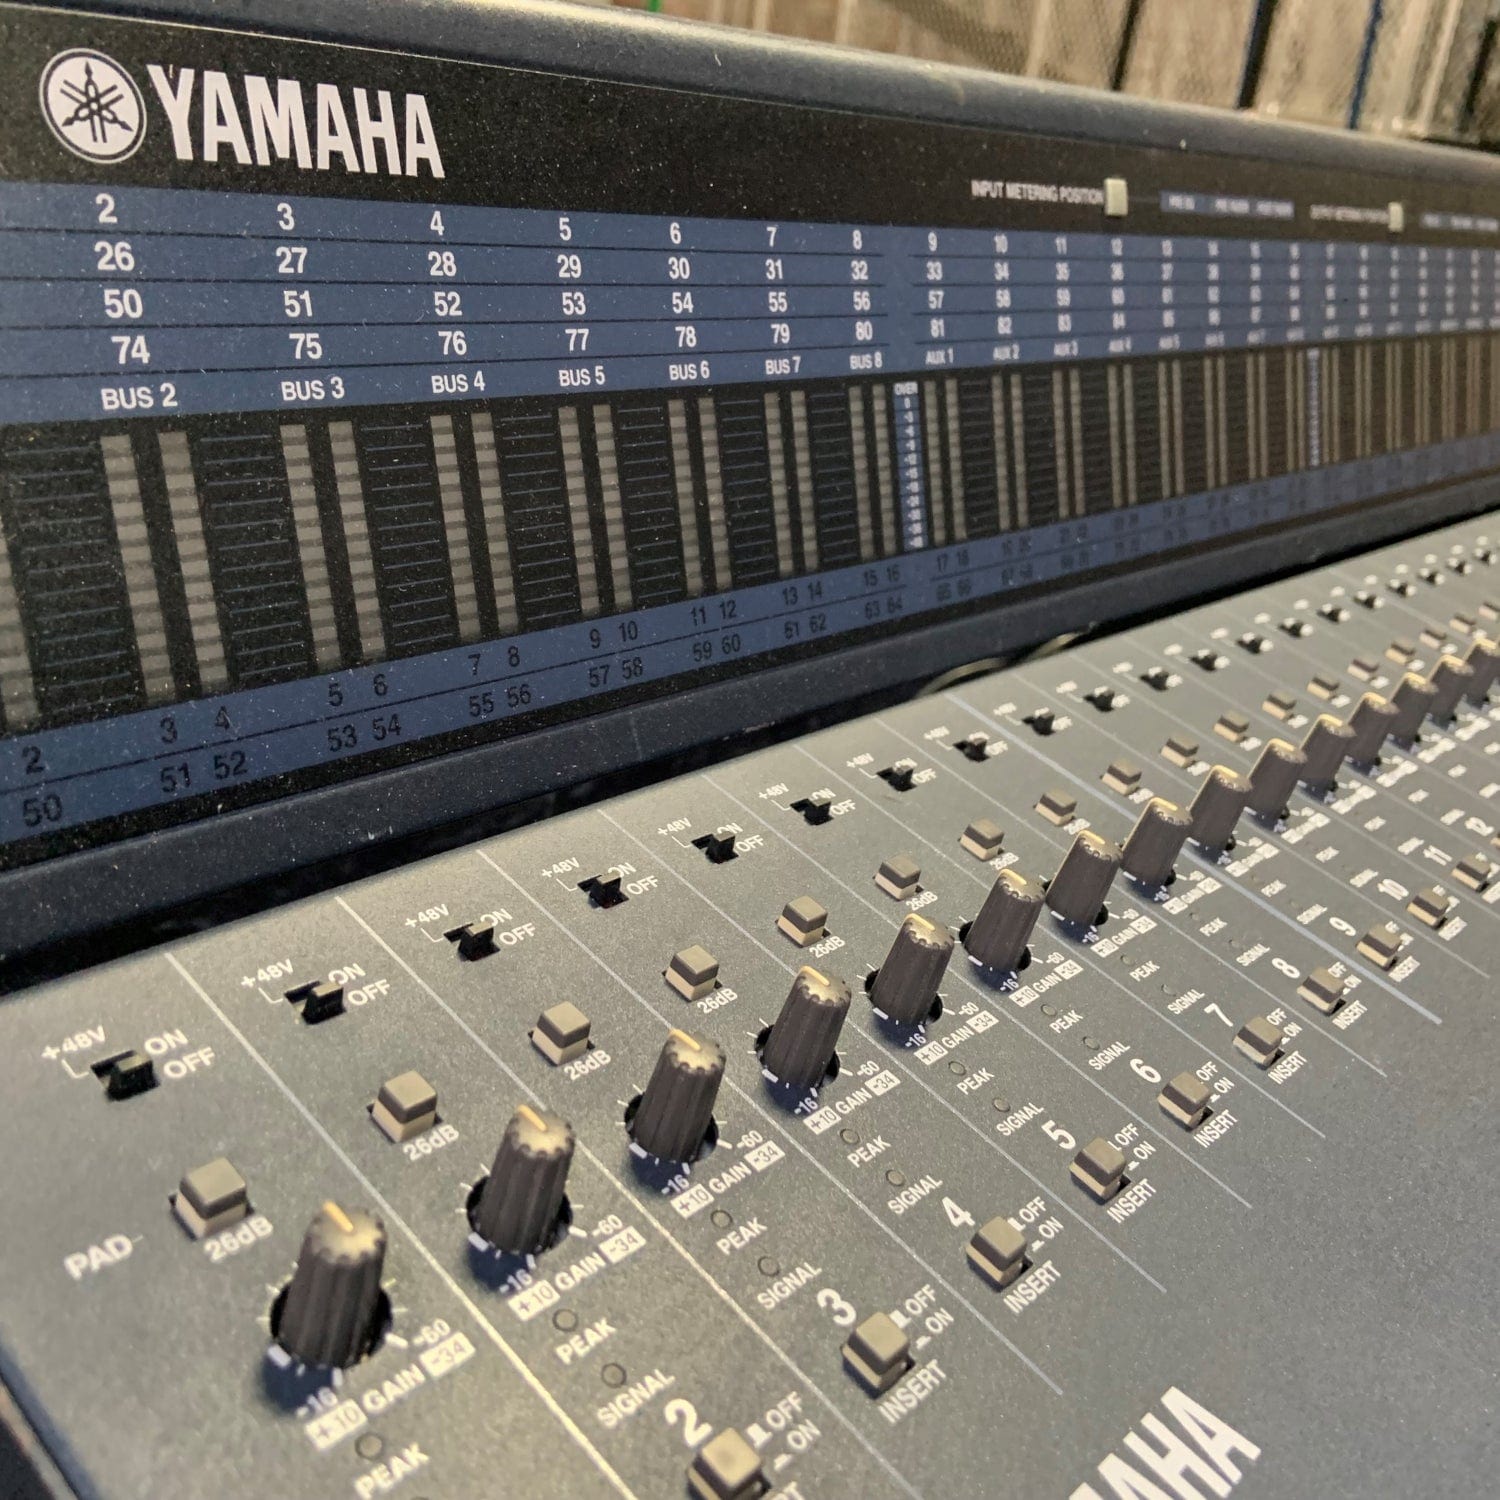 Yamaha DM 2000 96-Channel Digital Audio Mixing Console - PSSL ProSound and Stage Lighting